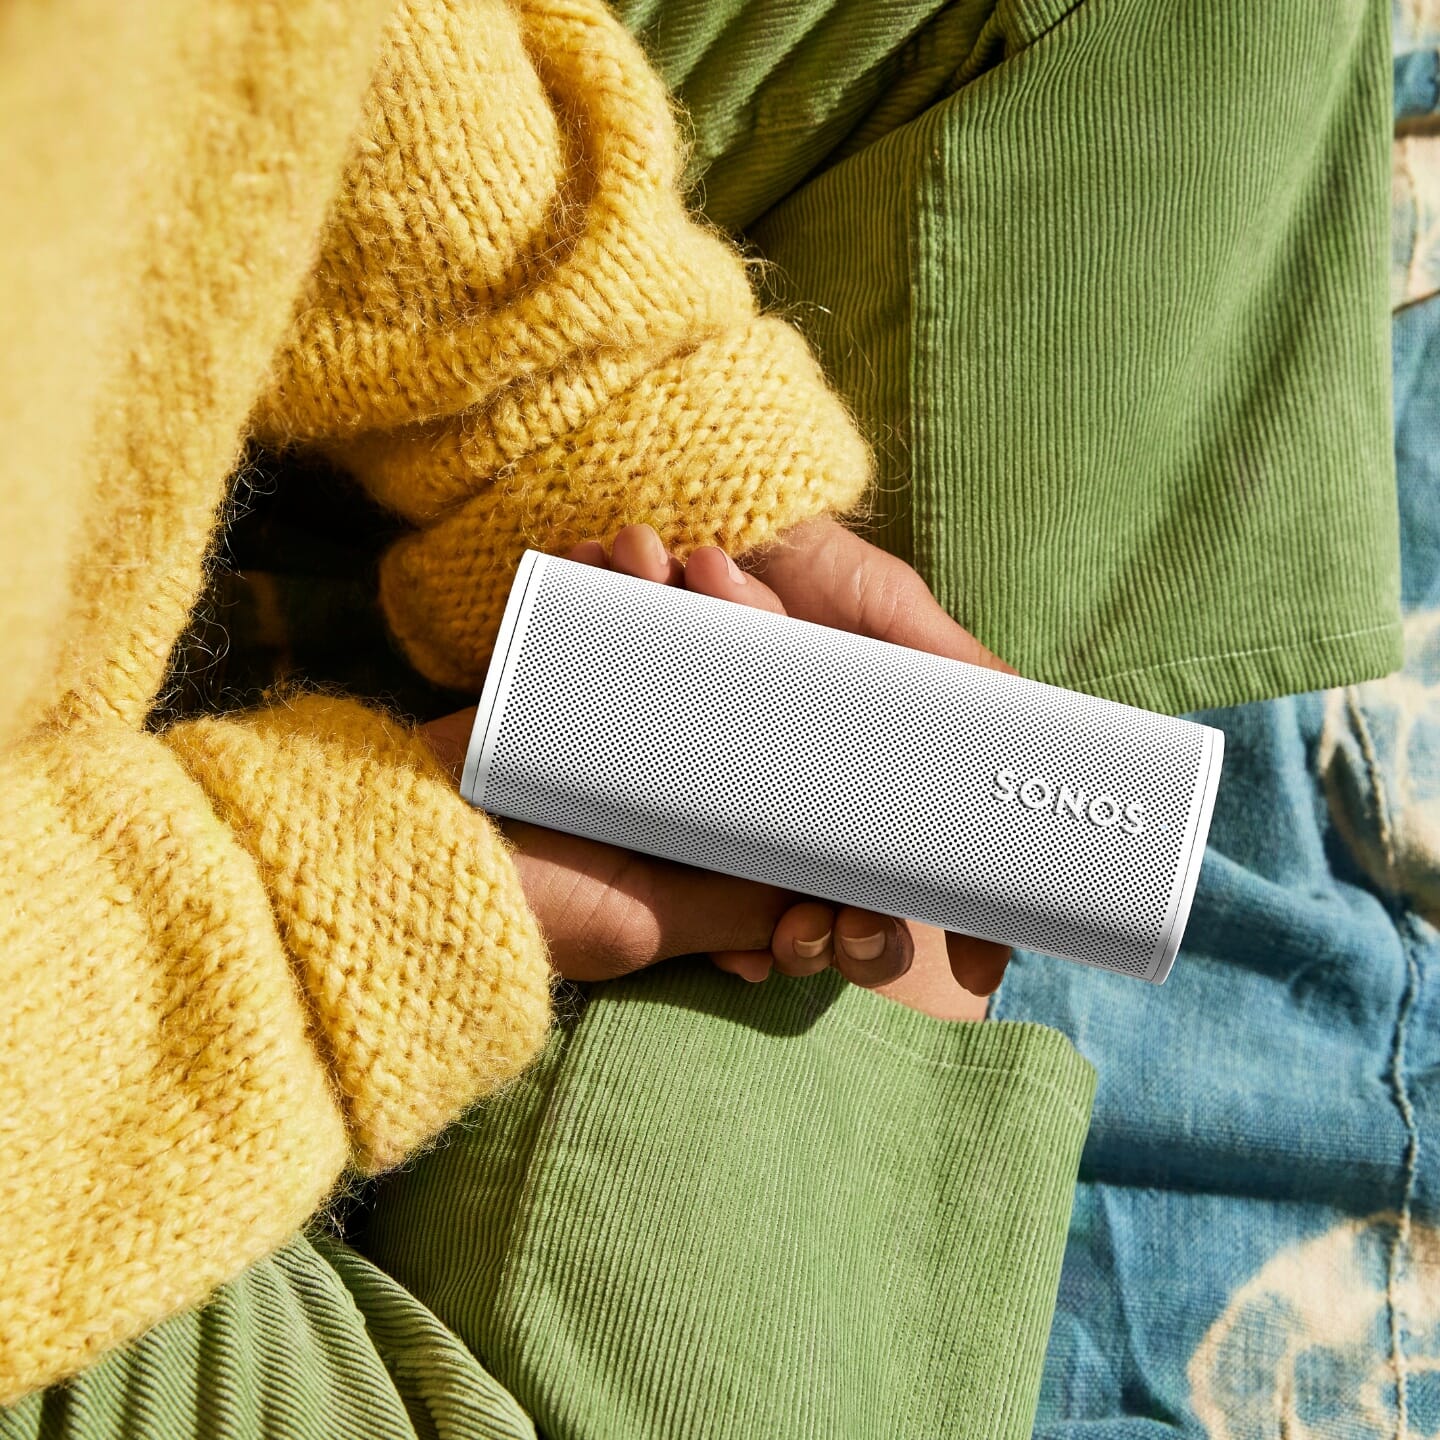 Sonos’ new and improved compact portable speaker is here! Your perfect summer companion, Roam 2 brings upgraded usability and a fresh design.